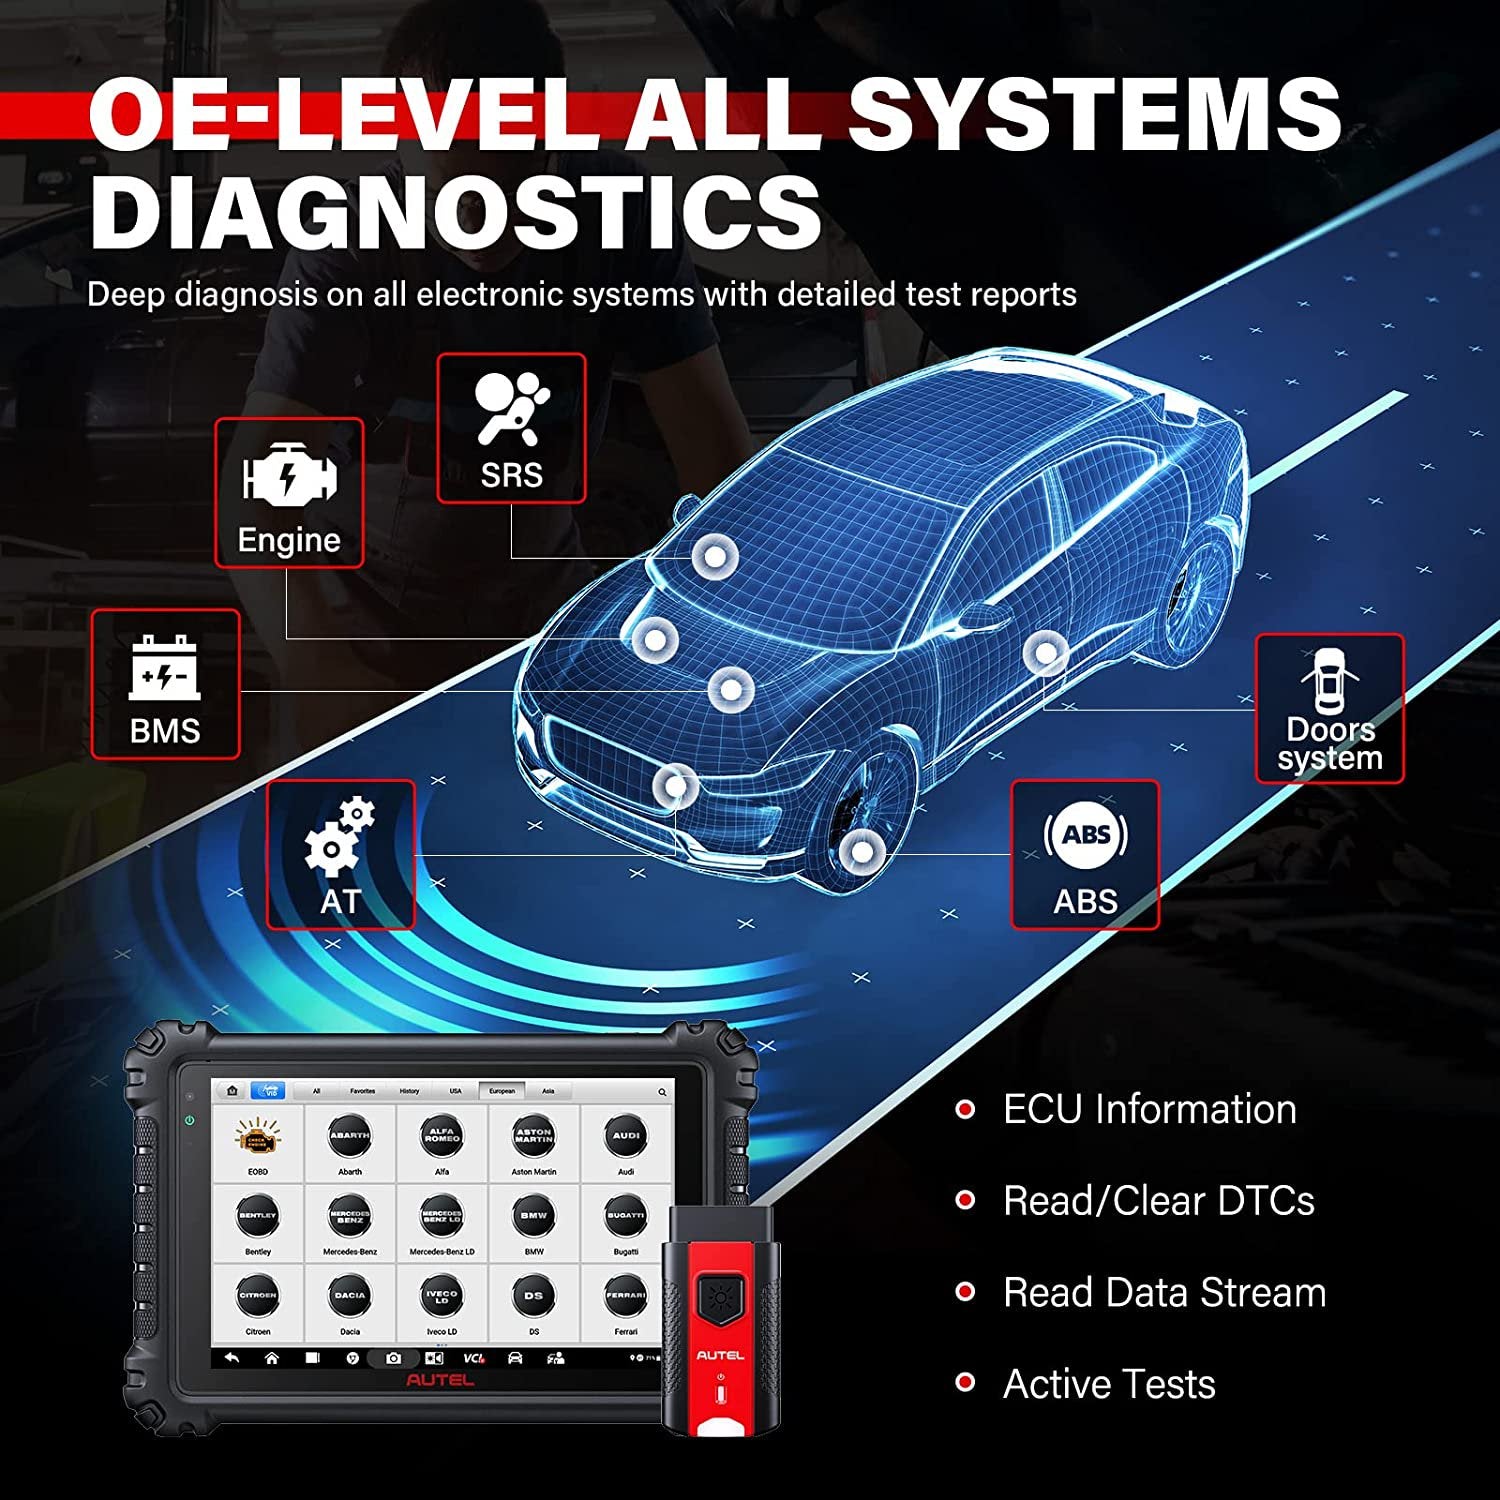 Autel Scanner MaxiSYS MS906 Pro Car Diagnostic Scan Tool Bi-Directional, All-System Diagnosis ECU Coding, 36+ Service, OE-Level Diagnostic System, CAN FD/ DoIP, with MV108